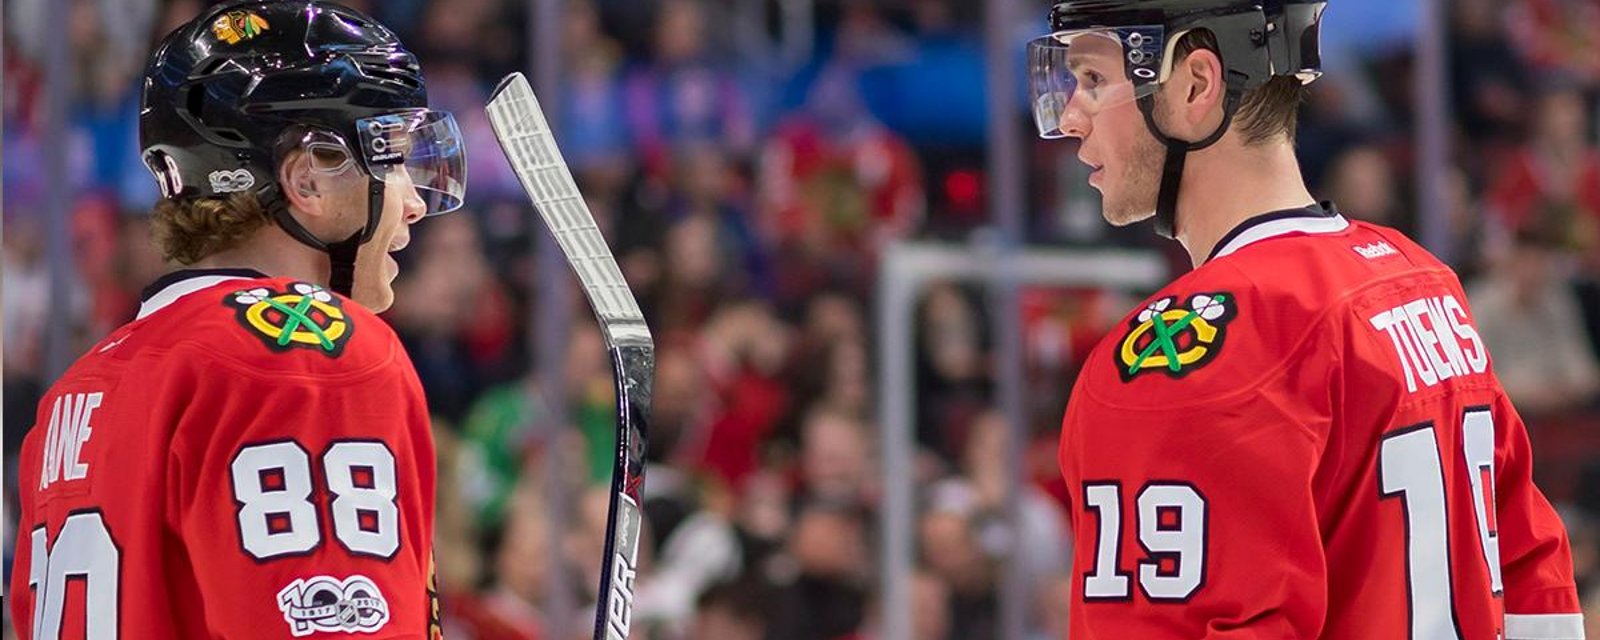 Report: Hawks’ Kane makes surprising comments about the captaincy in Chicago